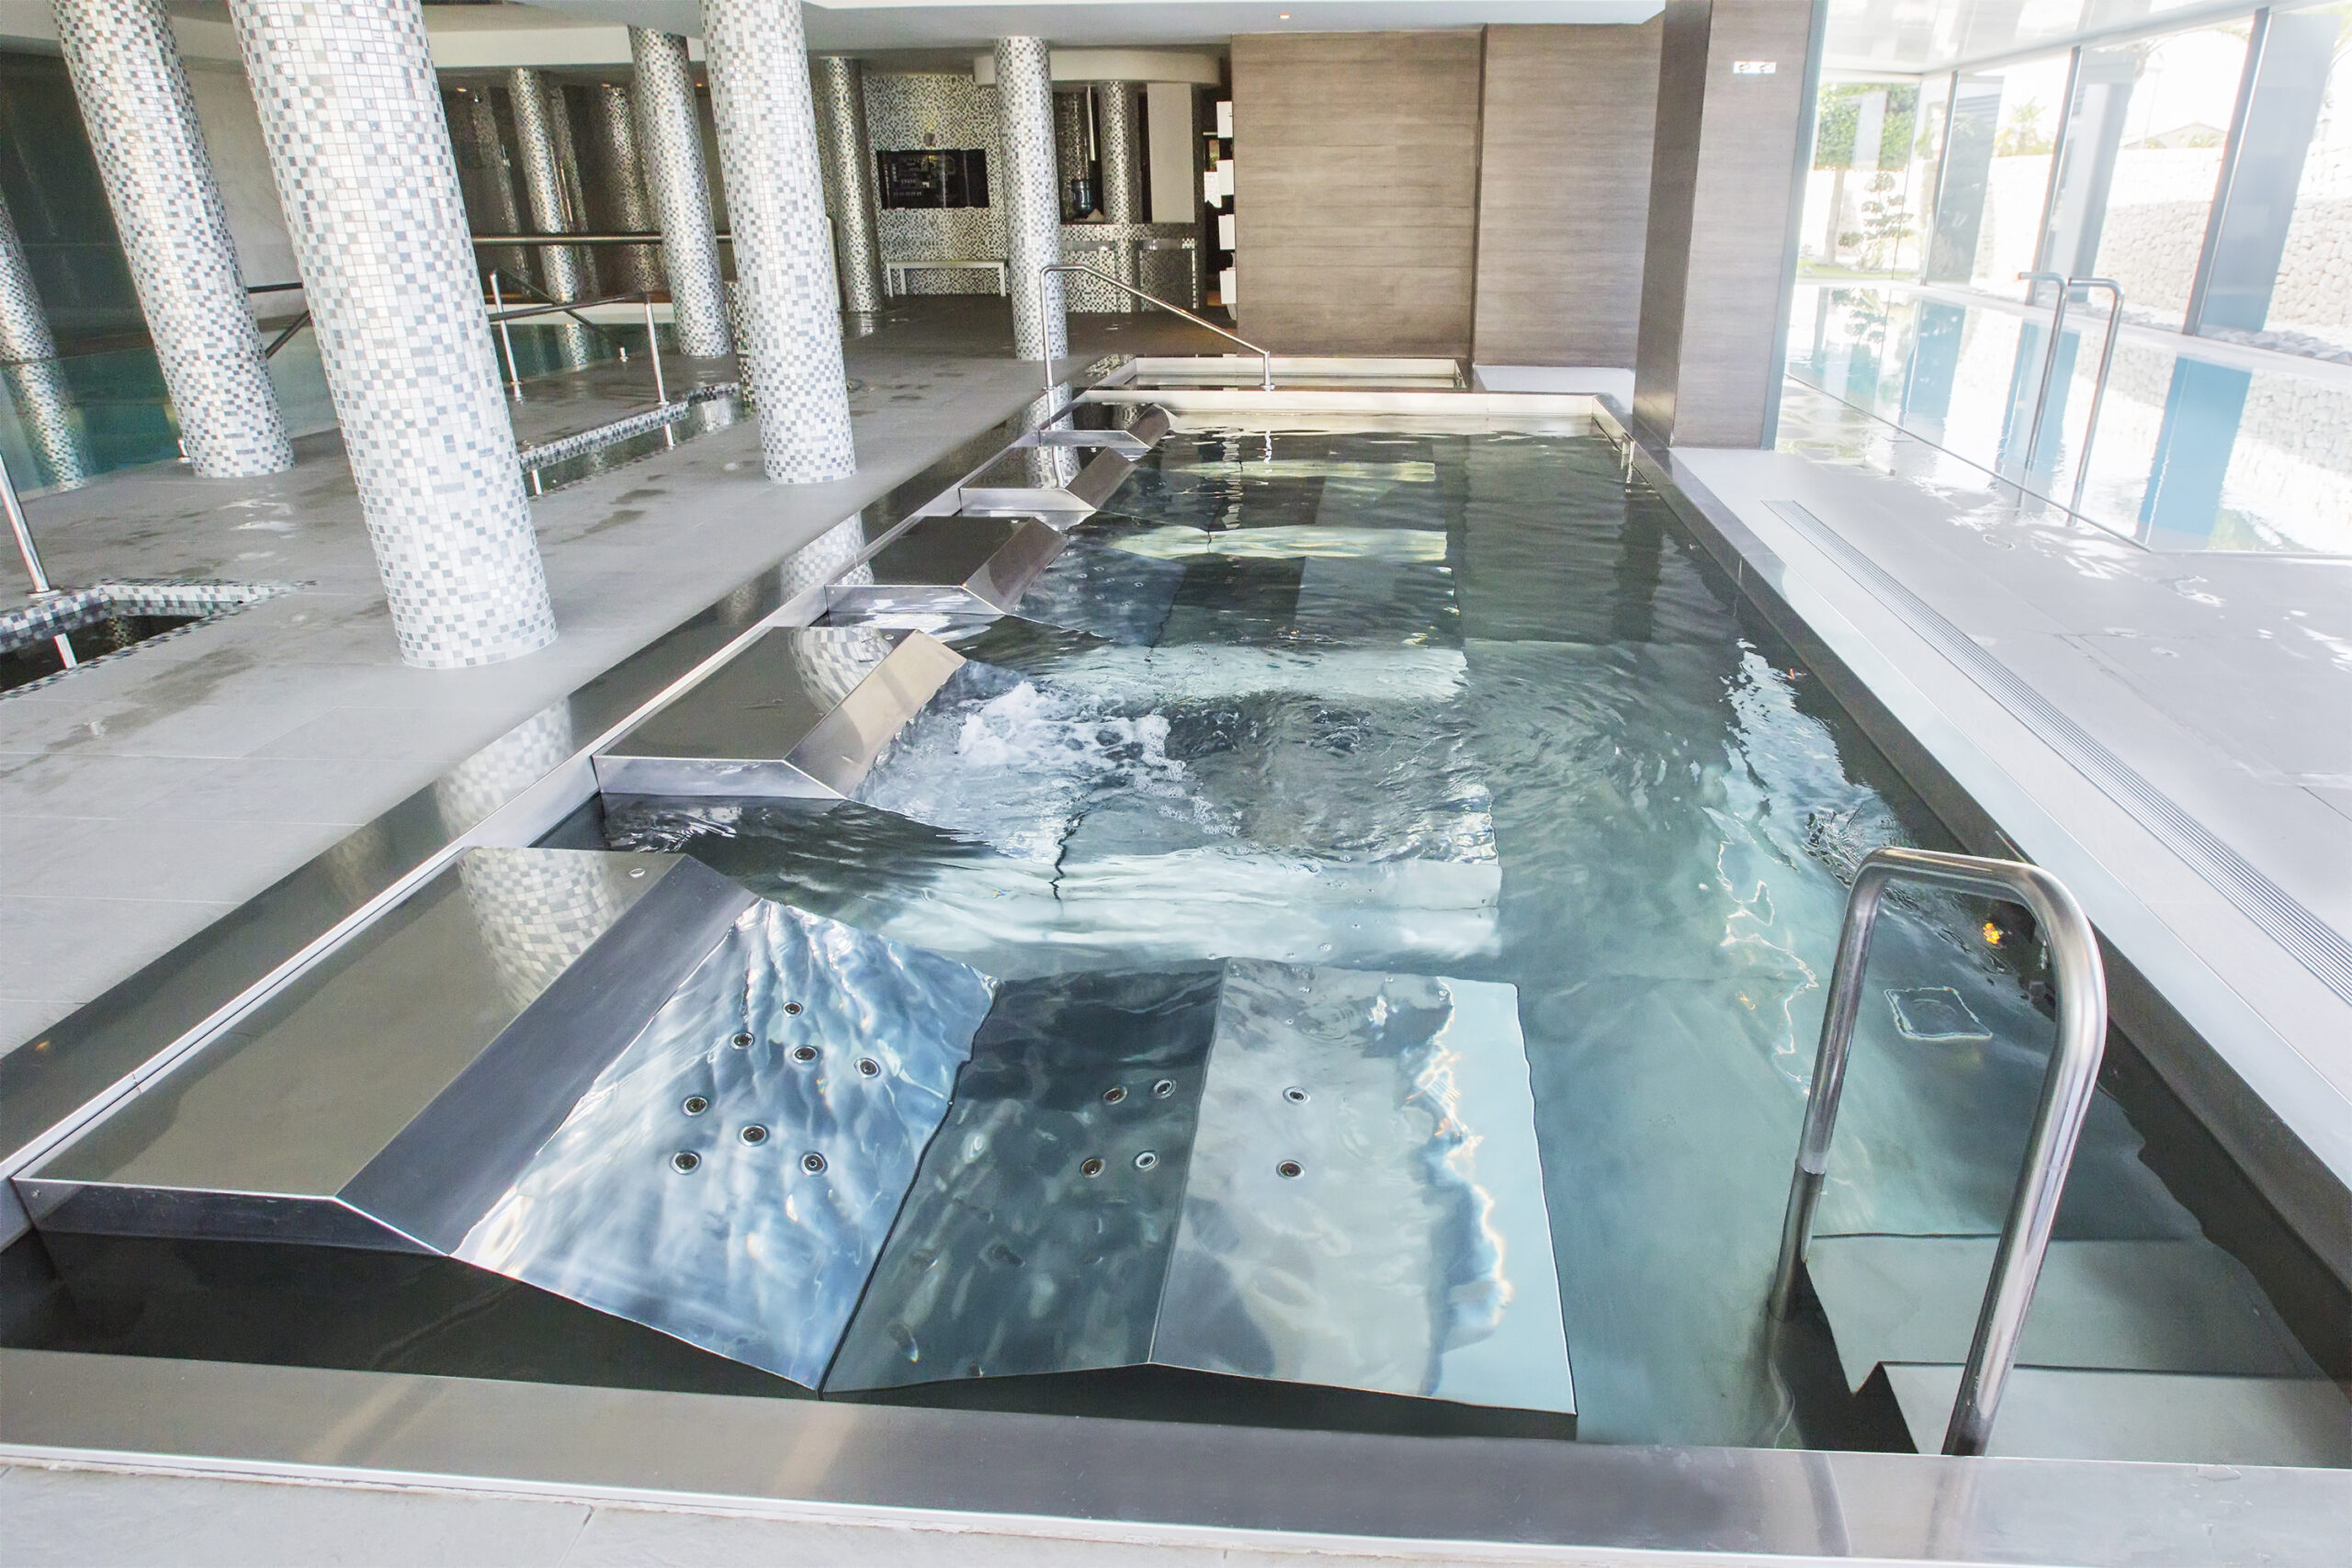 A modern design pool created for relaxation